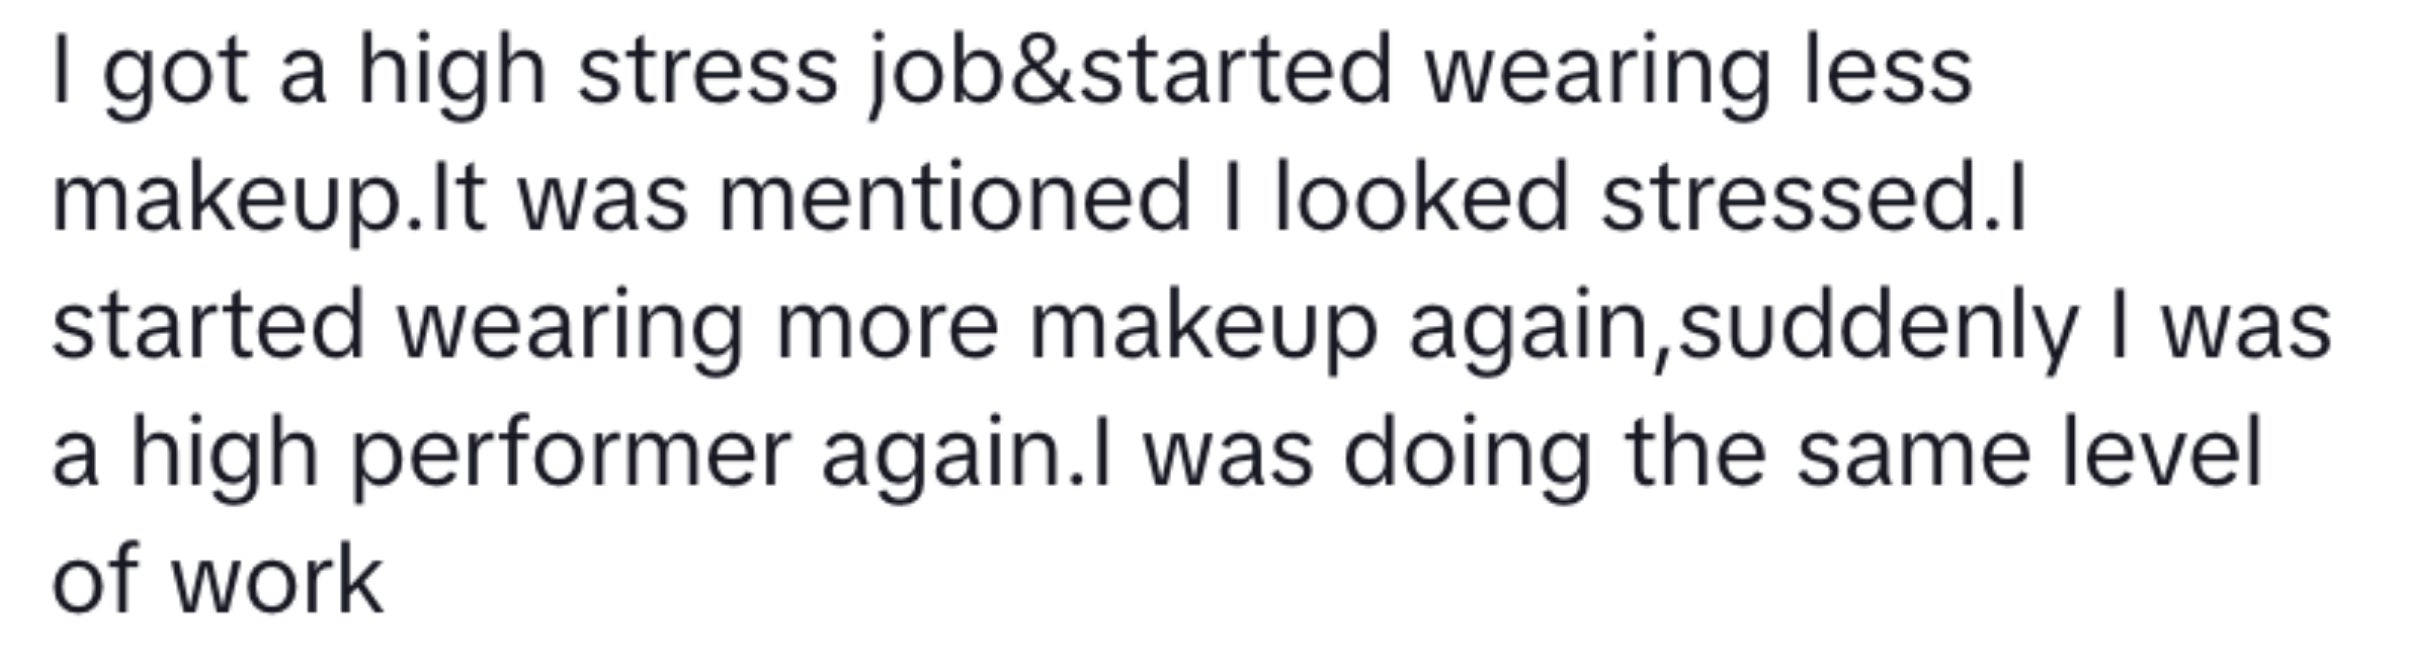 Social media screenshot of a user&#x27;s post about the perceived impact of wearing makeup on work performance